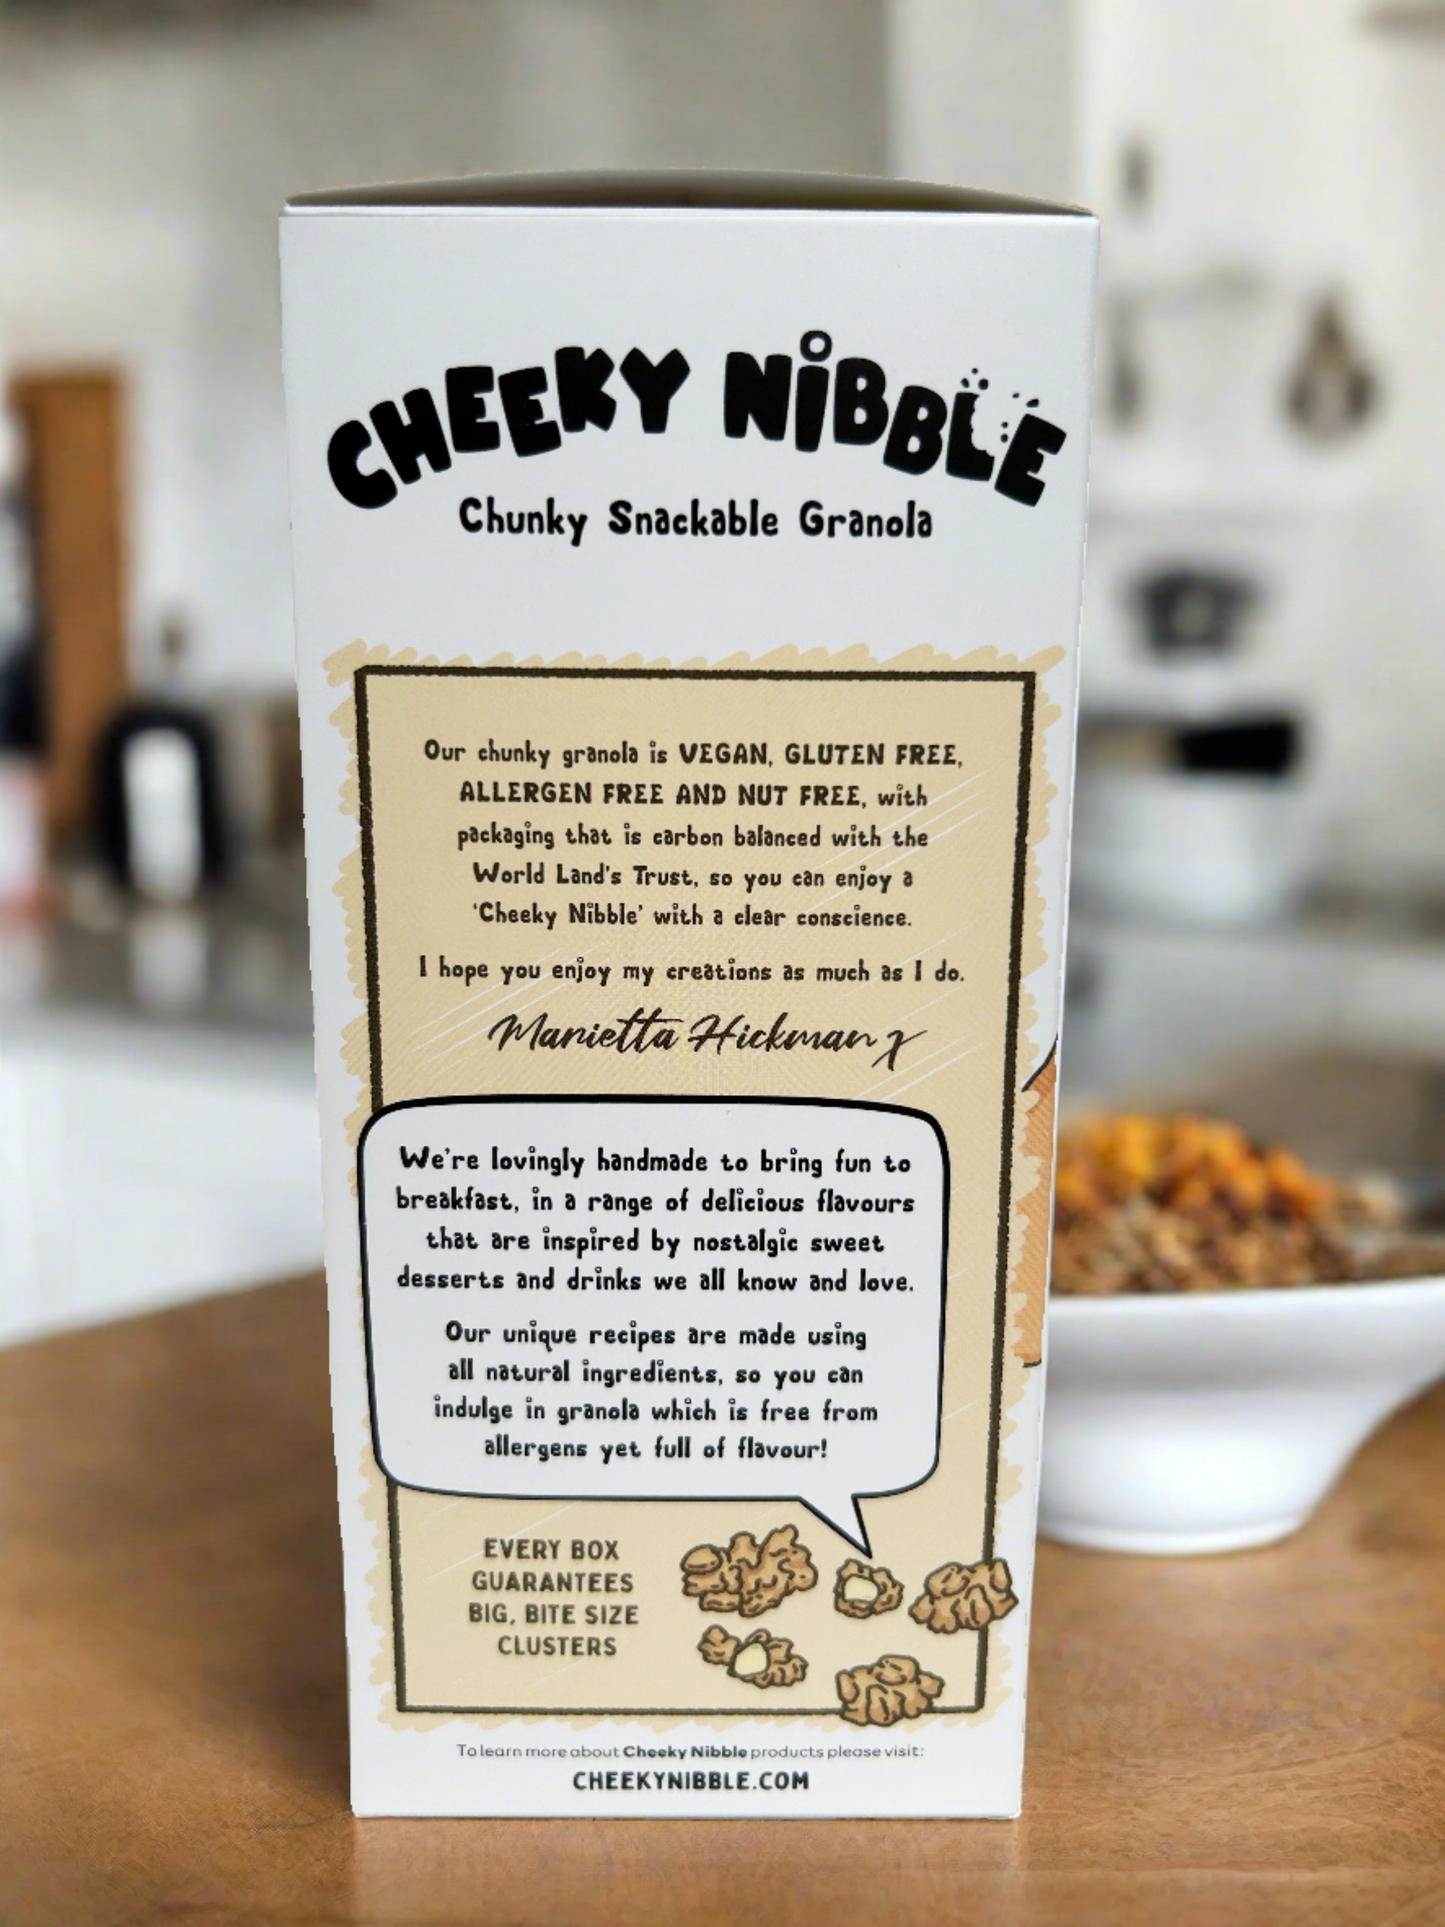 he cereal box features an image showcasing the Vanilla Latte flavored granola chunks, emphasizing their vegan and allergen-free attributes. Each chunk is depicted with detail, highlighting its robust texture and aromatic blend of vanilla and coffee flavors. The packaging prominently displays labels indicating its vegan and allergen-free status, ensuring accessibility to a wide range of dietary needs. 